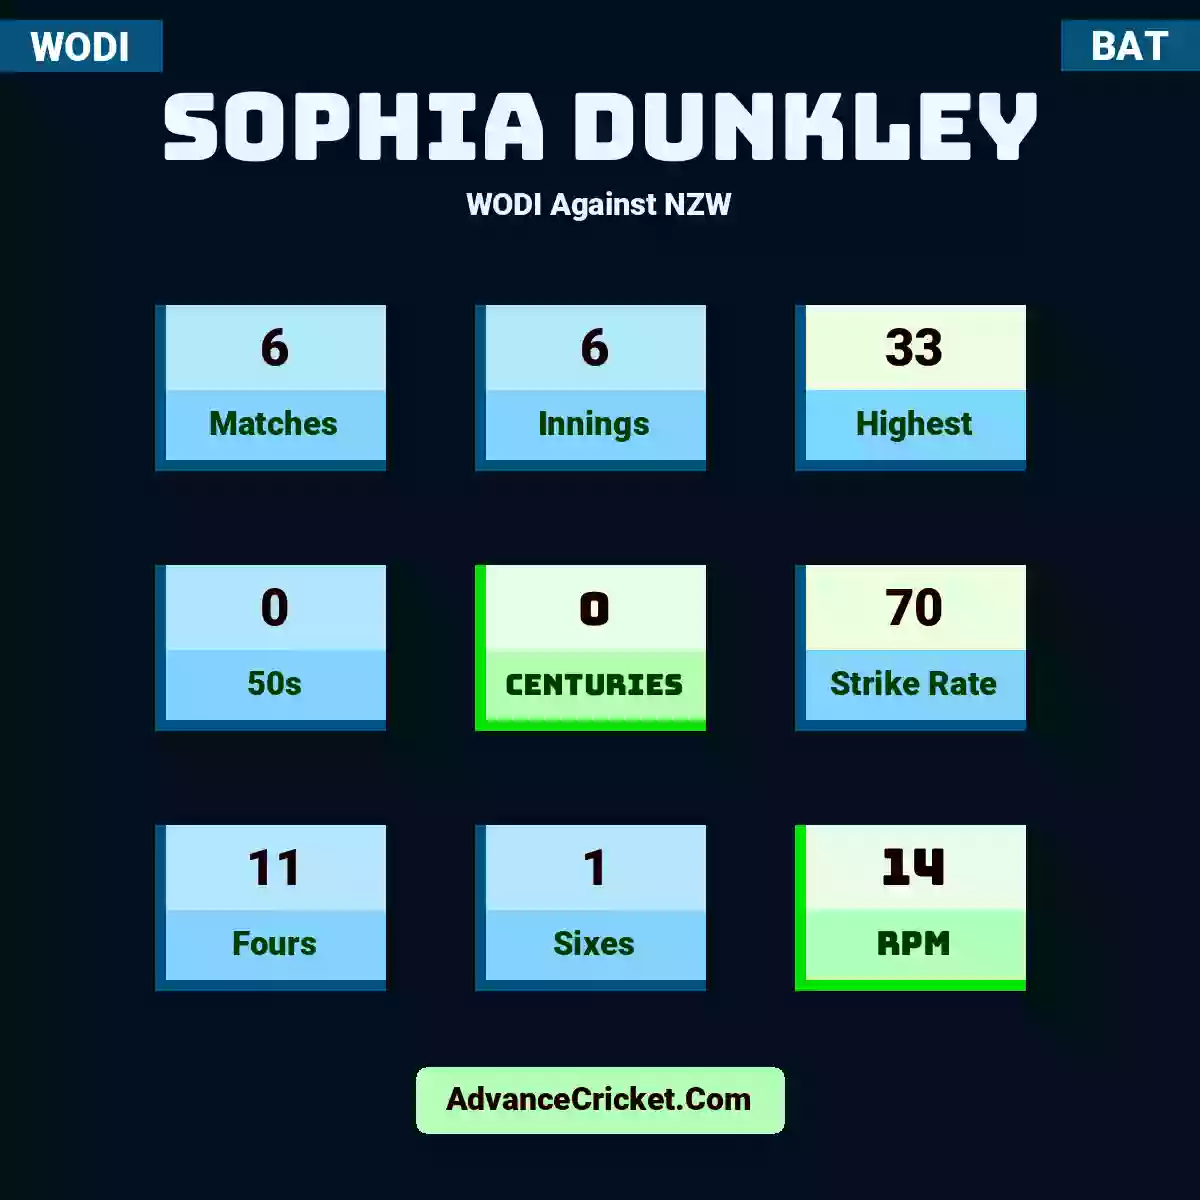 Sophia Dunkley WODI  Against NZW, Sophia Dunkley played 6 matches, scored 33 runs as highest, 0 half-centuries, and 0 centuries, with a strike rate of 70. S.Dunkley hit 11 fours and 1 sixes, with an RPM of 14.